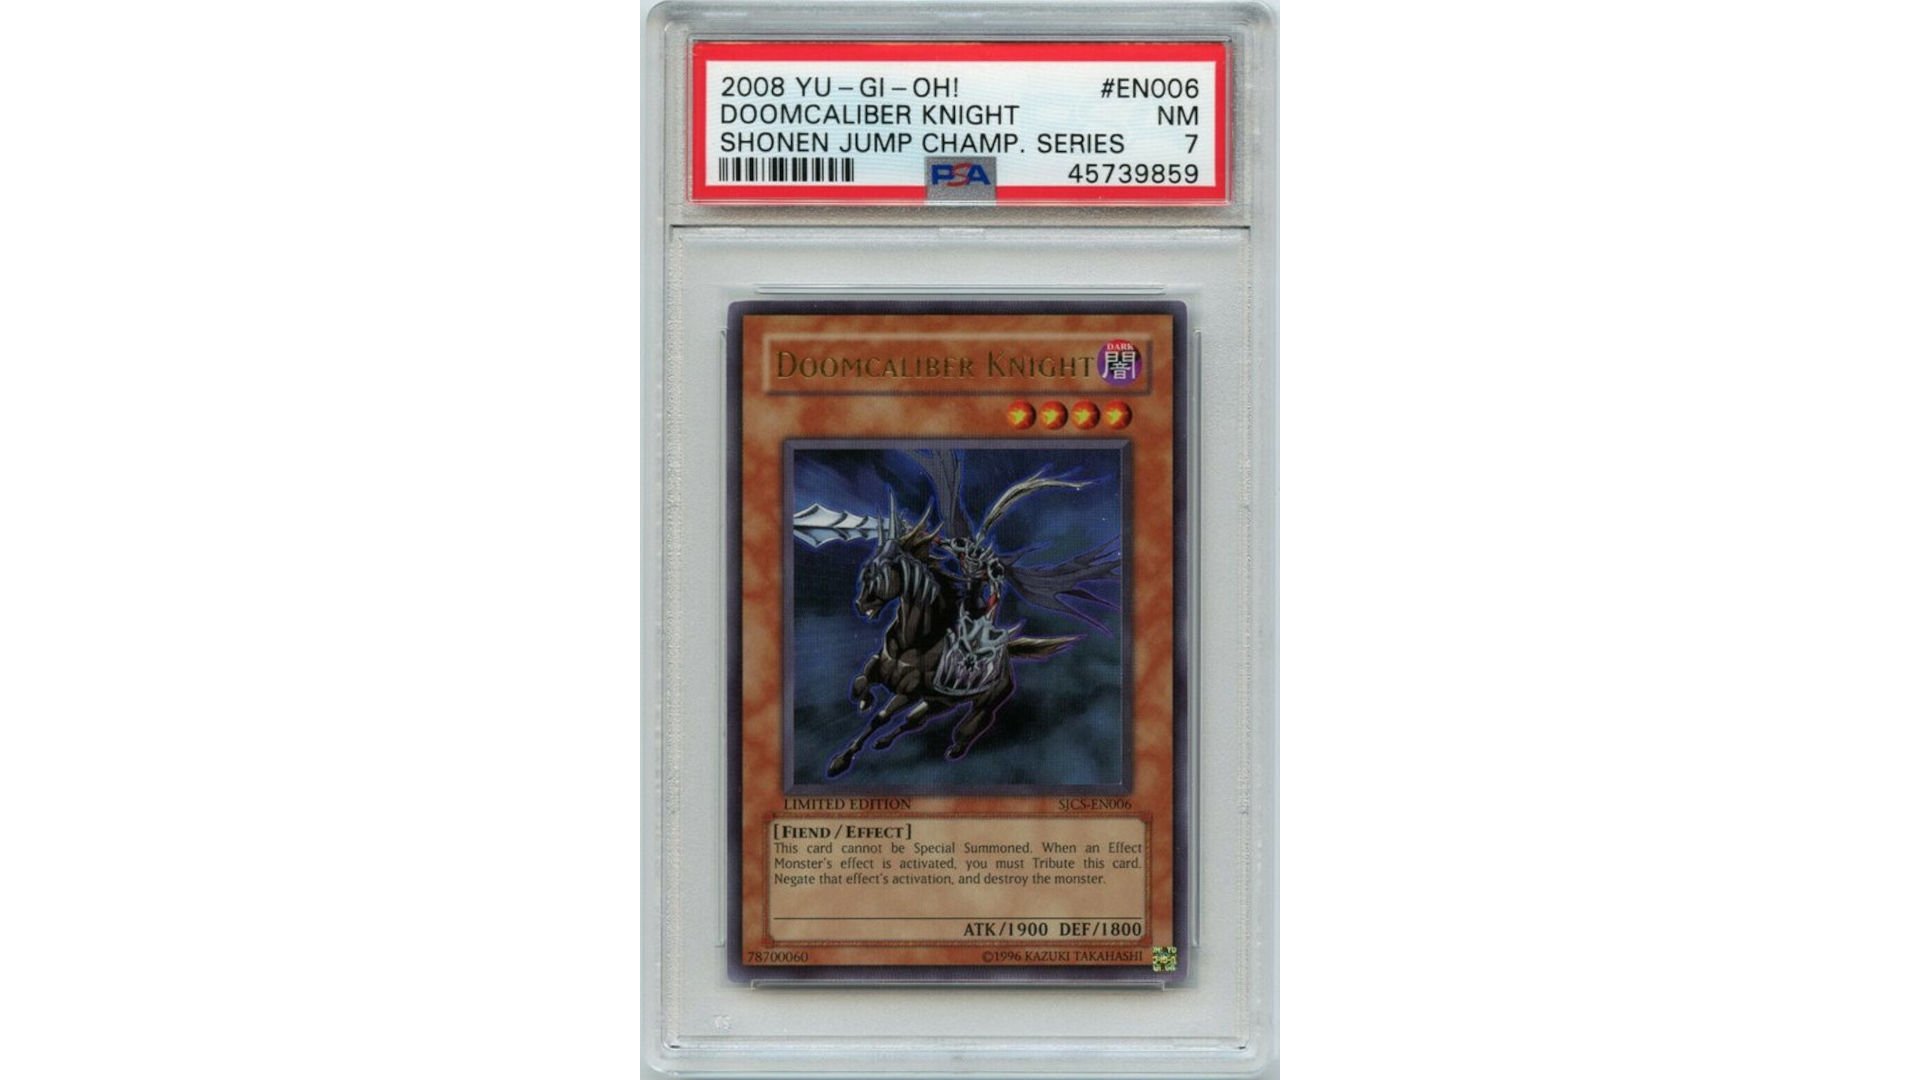 Most expensive Yugioh cards - photo of a graded Deoomcaliber Knight card, a rare YuGiOh card